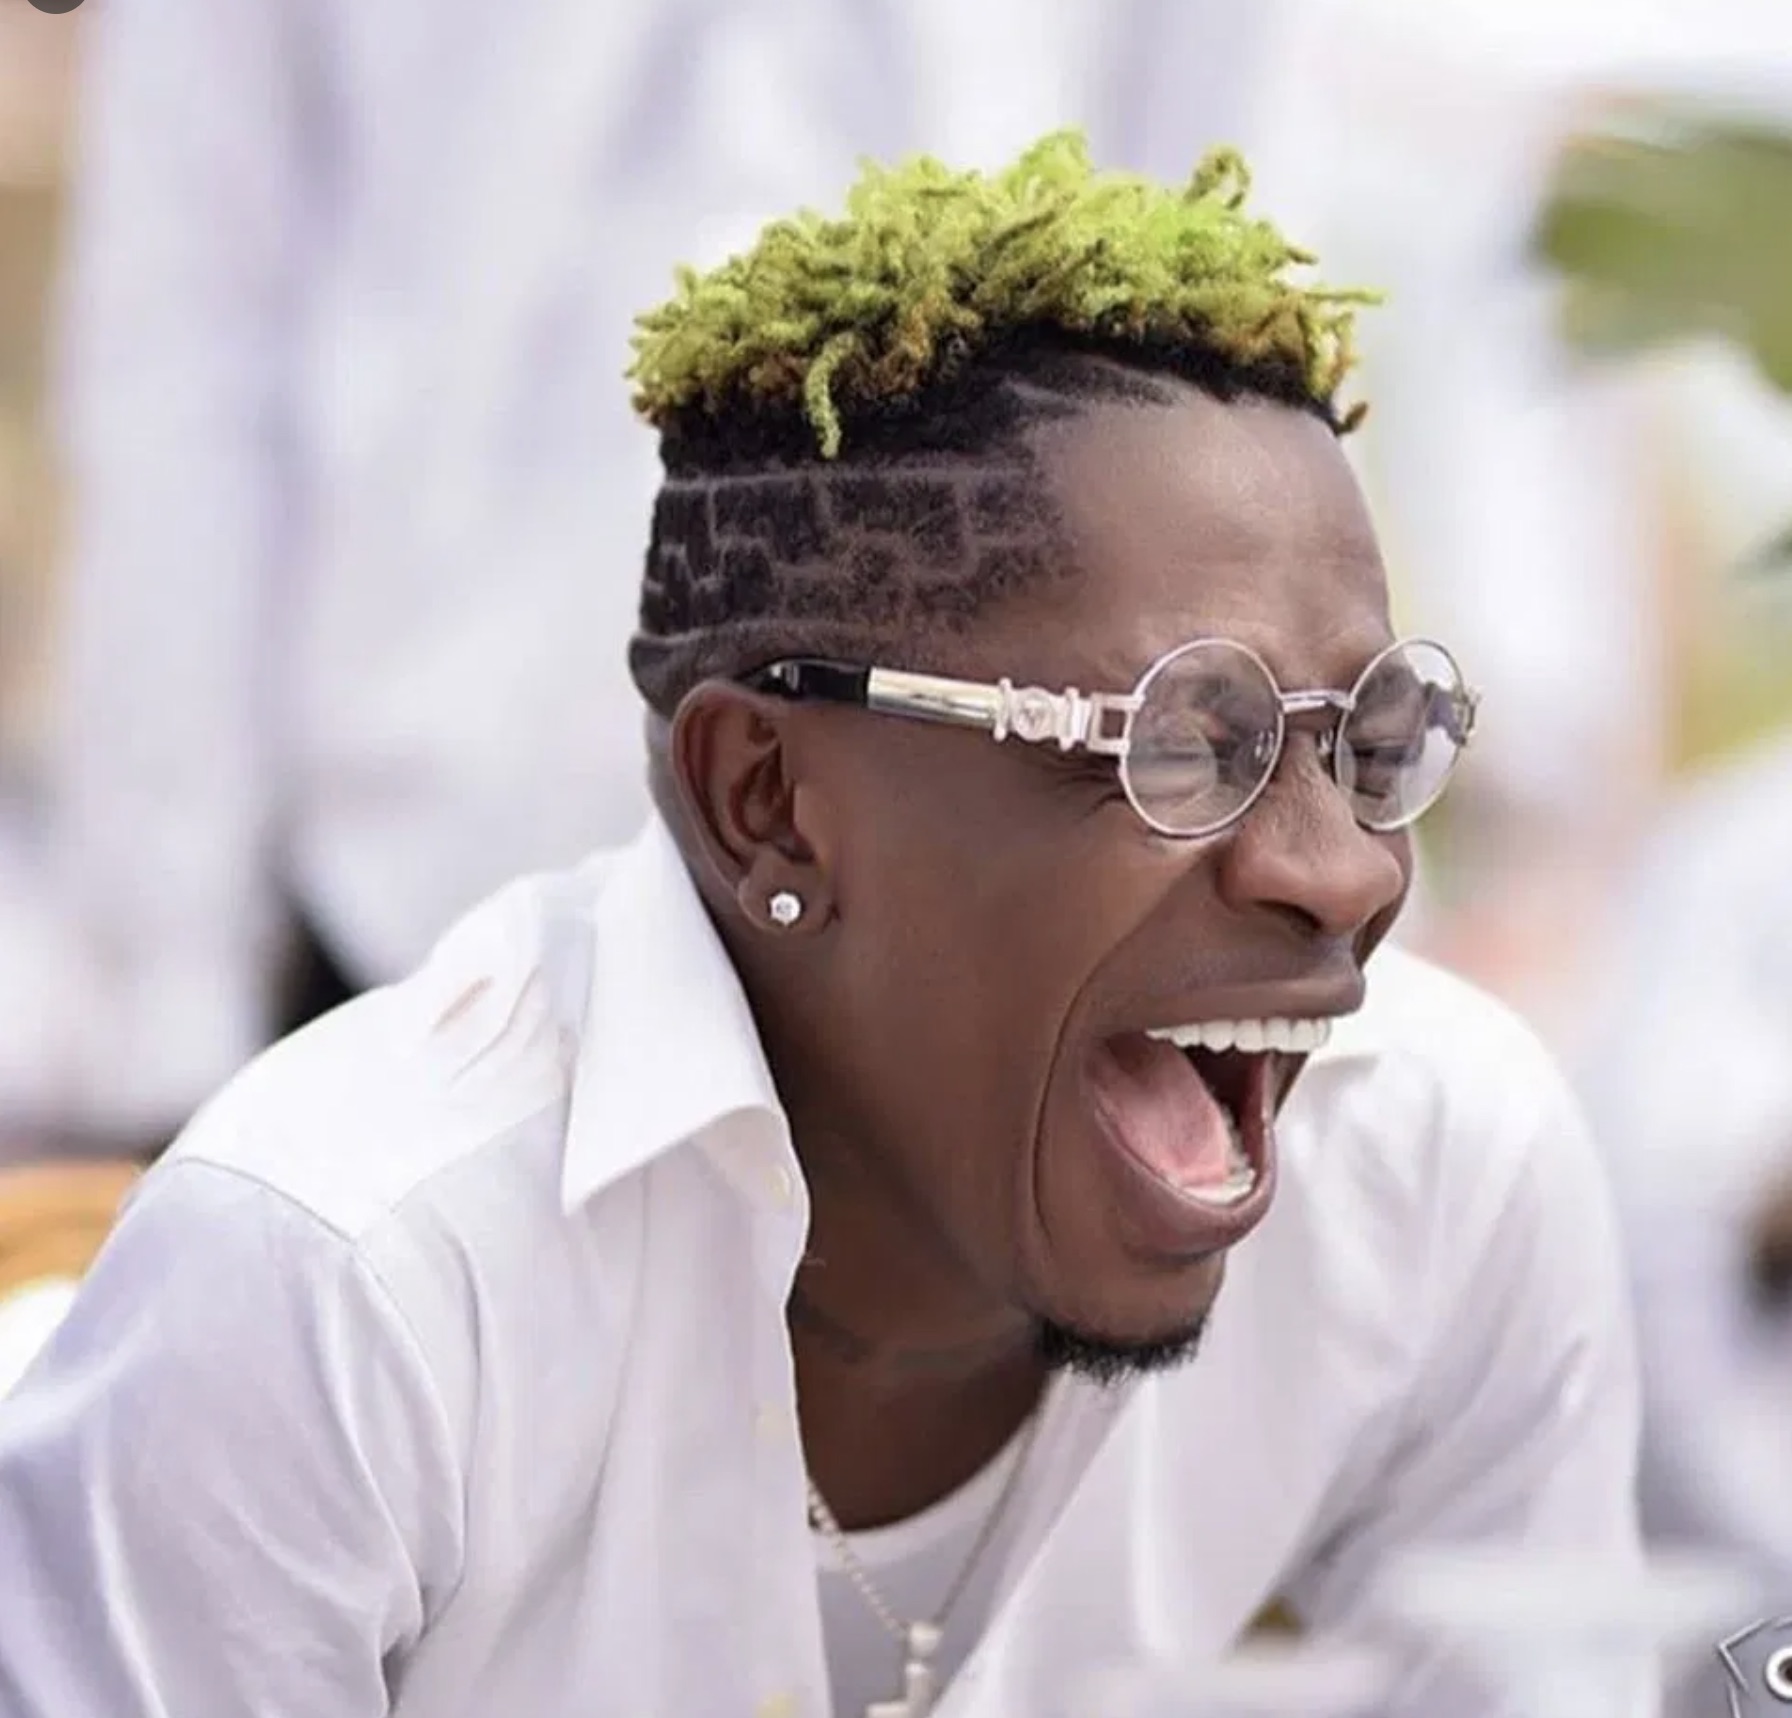 If you take my beefs personal, you will get high blood pressure for nothing – Shatta Wale advises colleagues